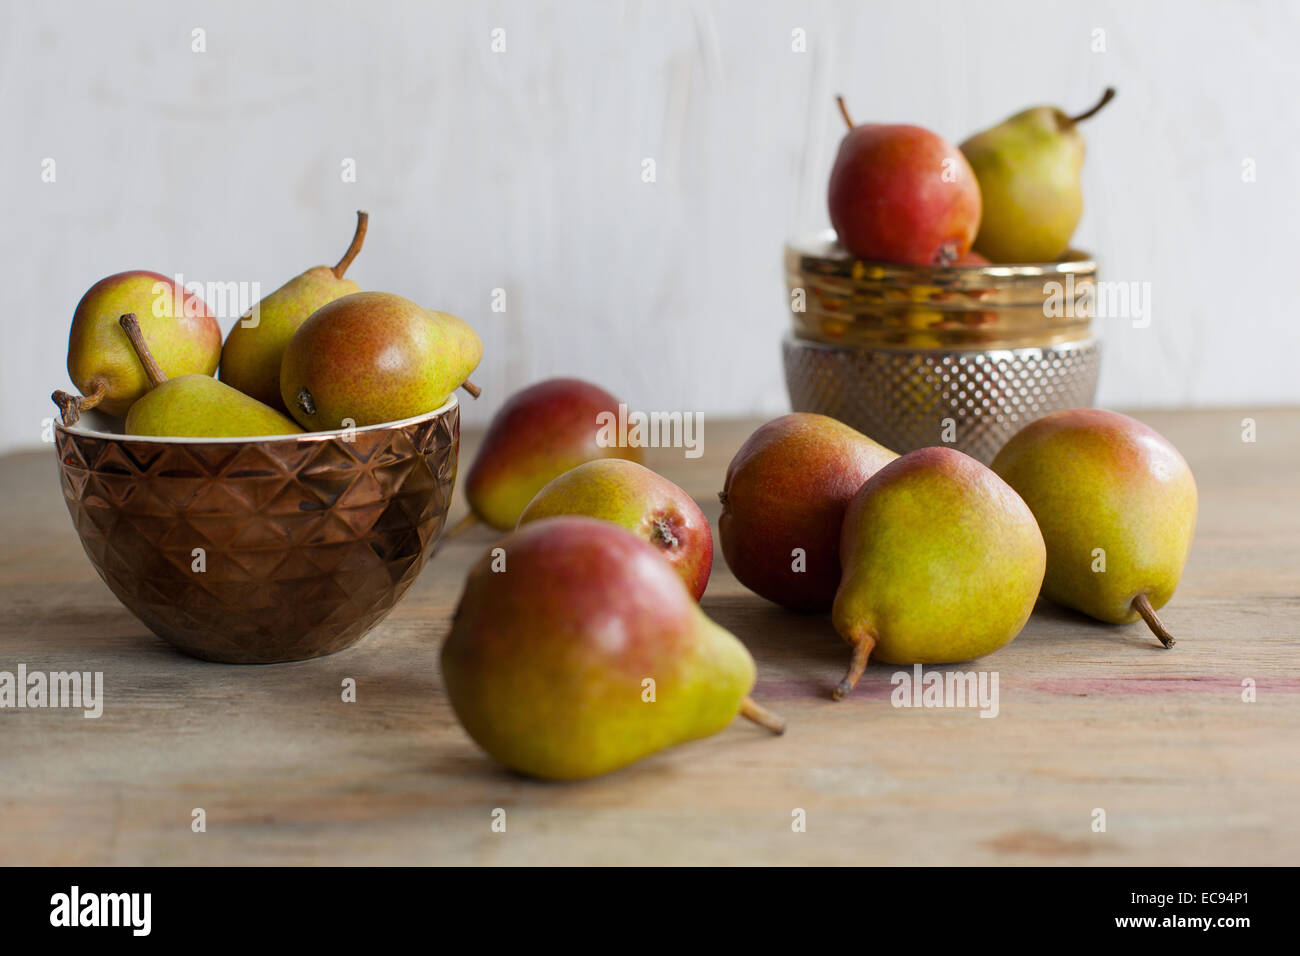 Still life of pears and metal bowls Stock Photo